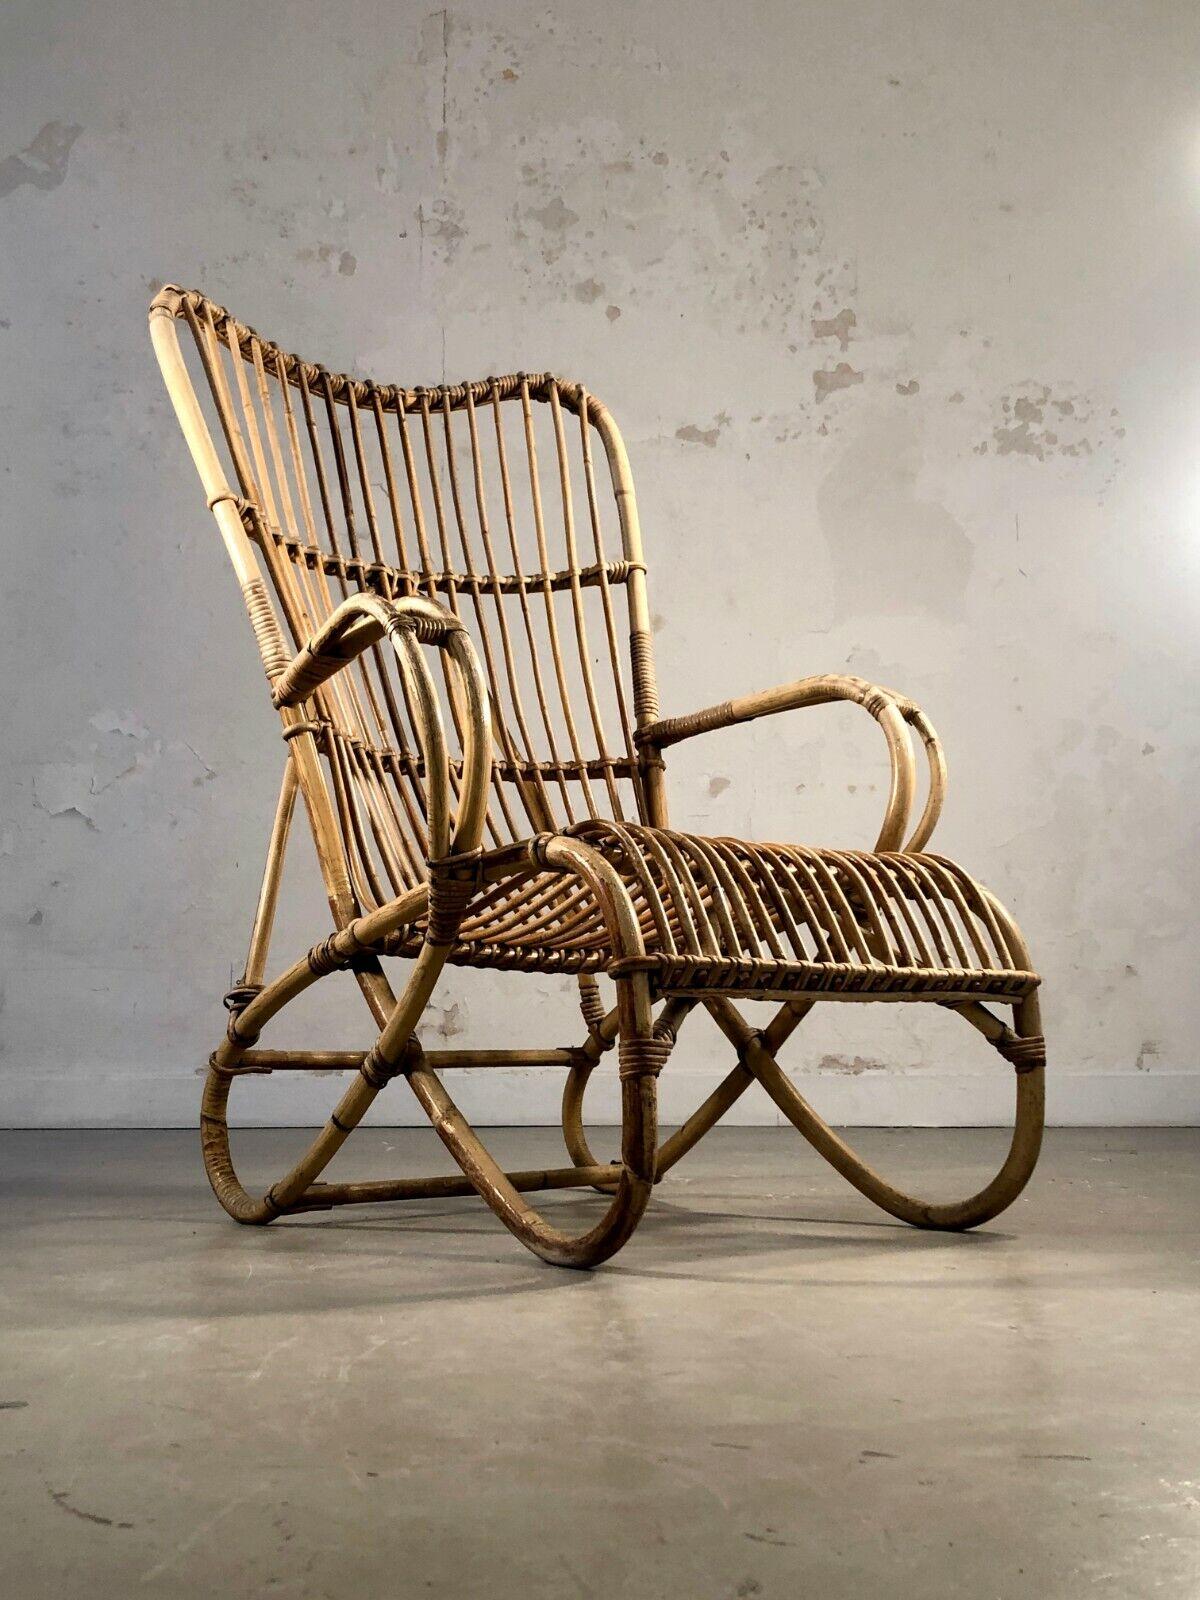 A spectacular charming armchair with wings, Modernist, Forme-Libre, Shabby-Chic, folded bamboo structures and wicker seat, in the spirit of Louis Sognot, to be attributed, France 1950. Often attributed to a Scandinavian designer, this armchair is